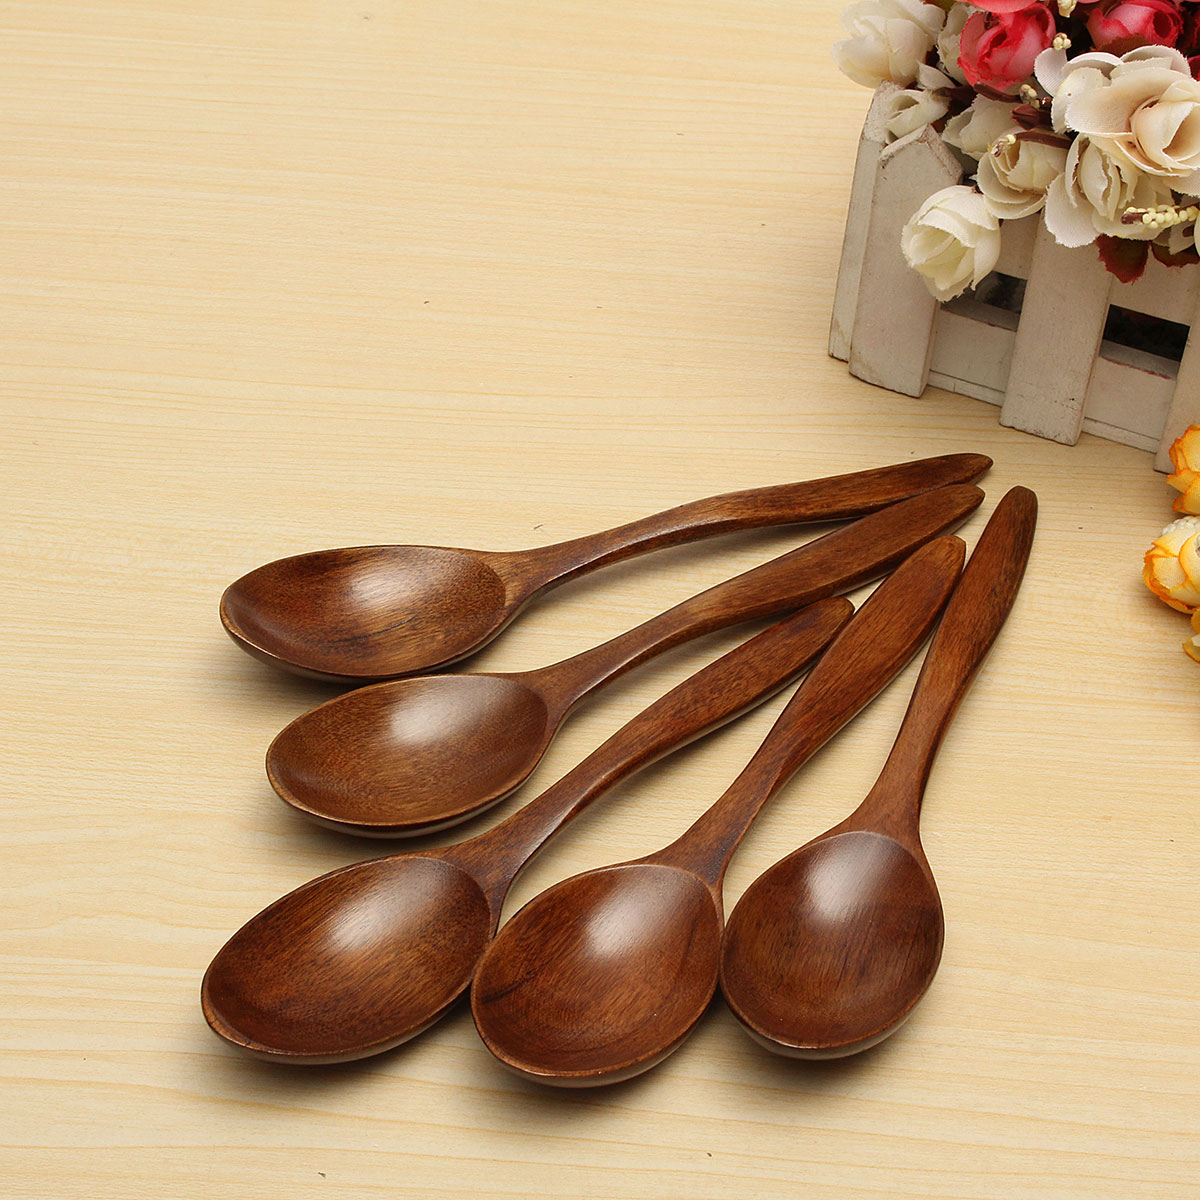 5Pcs-Wooden-Cooking-Kitchen-Utensil-Coffee-Tea-Ice-Cream-Soup-Caterin-Spoon-Tool-1067937-3